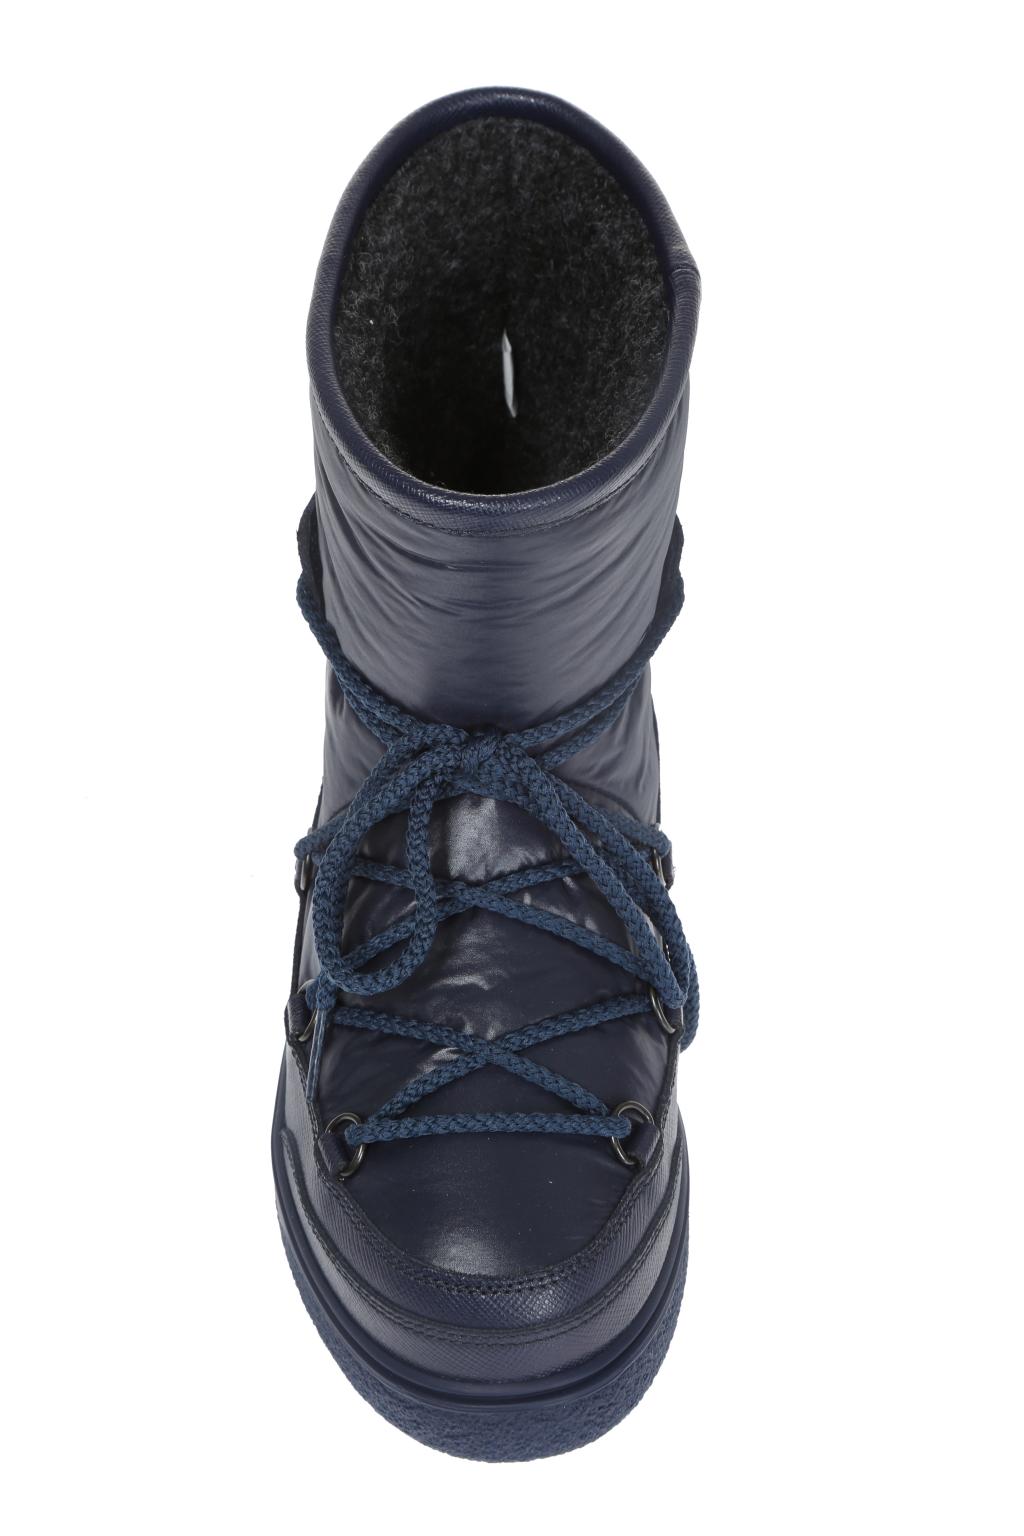 moncler new fanny boots